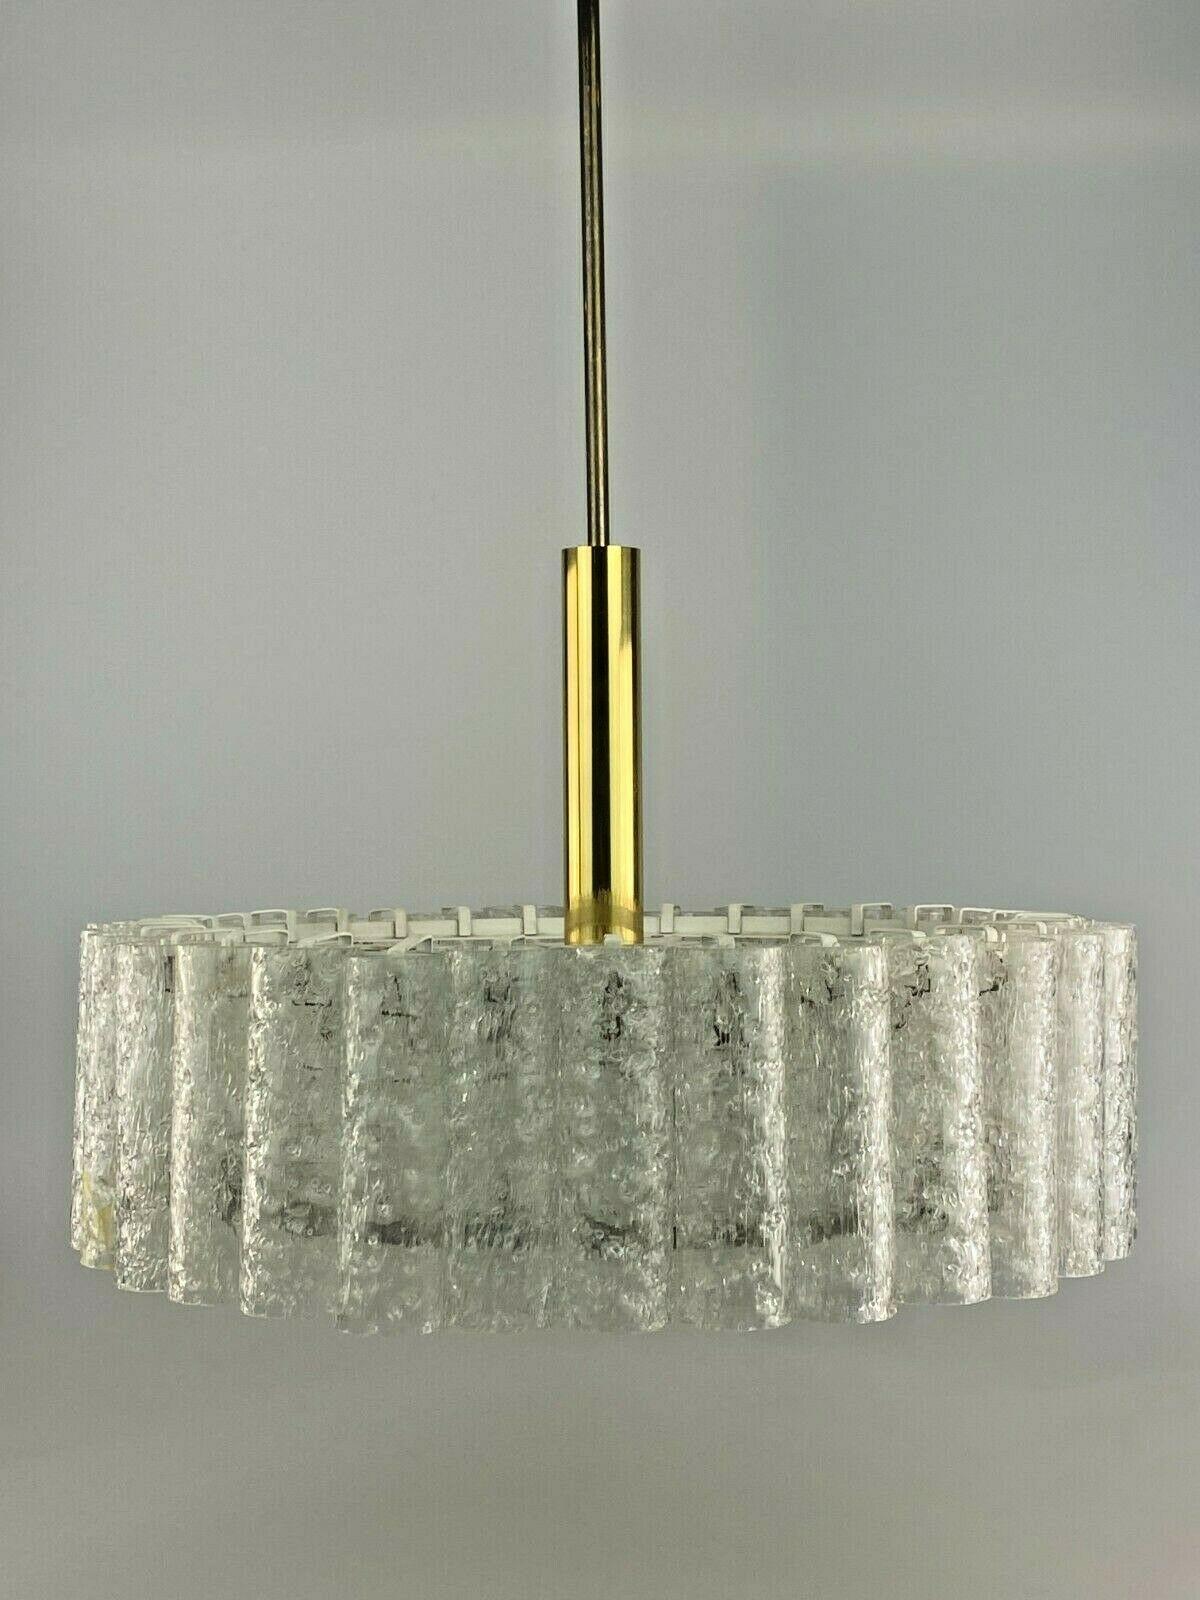 XL 60s 70s Chandelier Chandelier Doria Brass Glass Space Age Design 60s

Object: chandelier

Manufacturer: Doria

Condition: good

Age: around 1960-1970

Dimensions:

Diameter = 45cm
Height = 78cm

Other notes:

The pictures serve